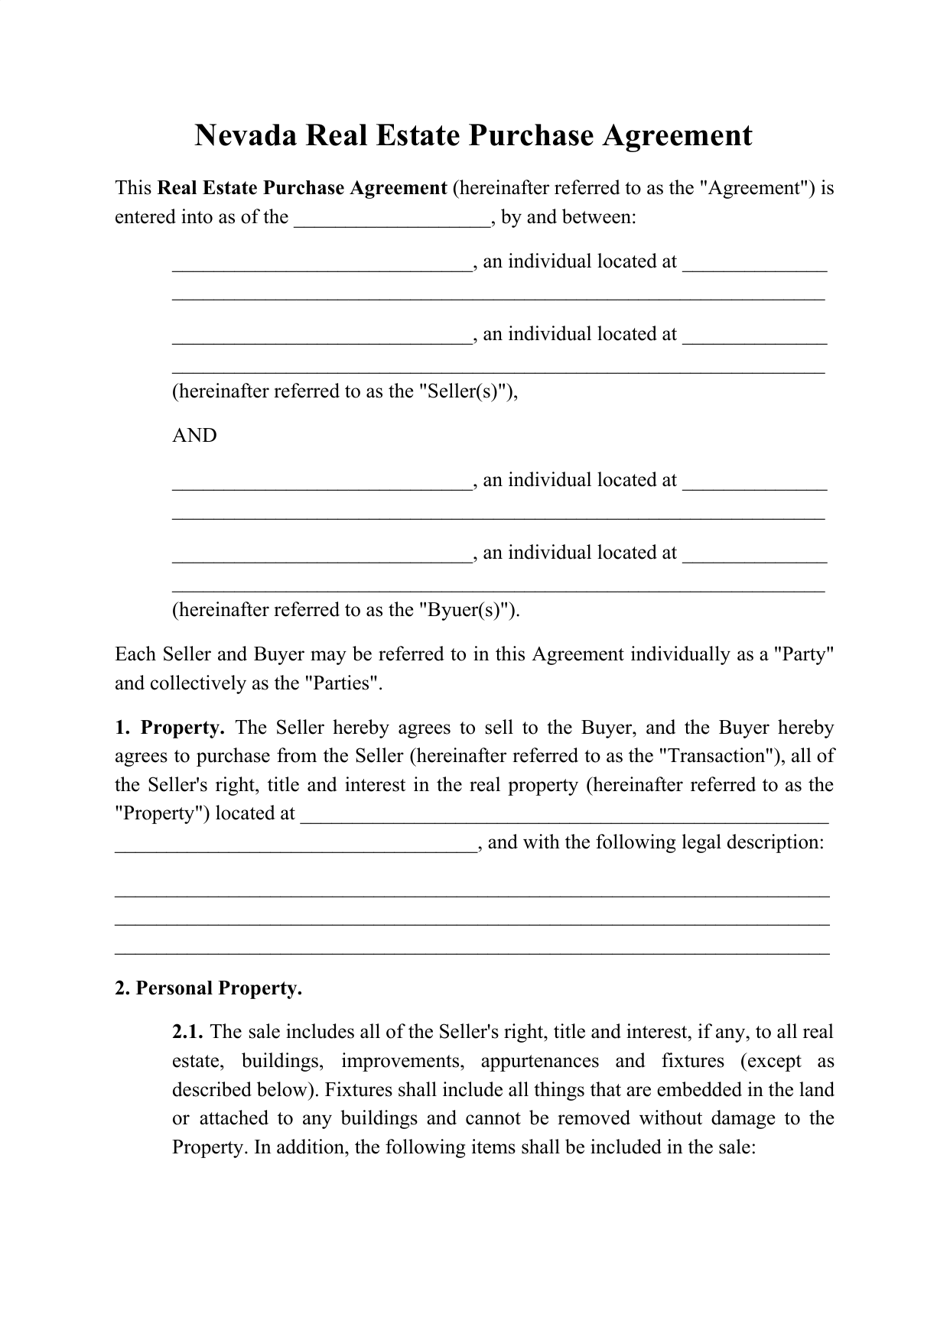 Real Estate Purchase Agreement Template - Nevada, Page 1